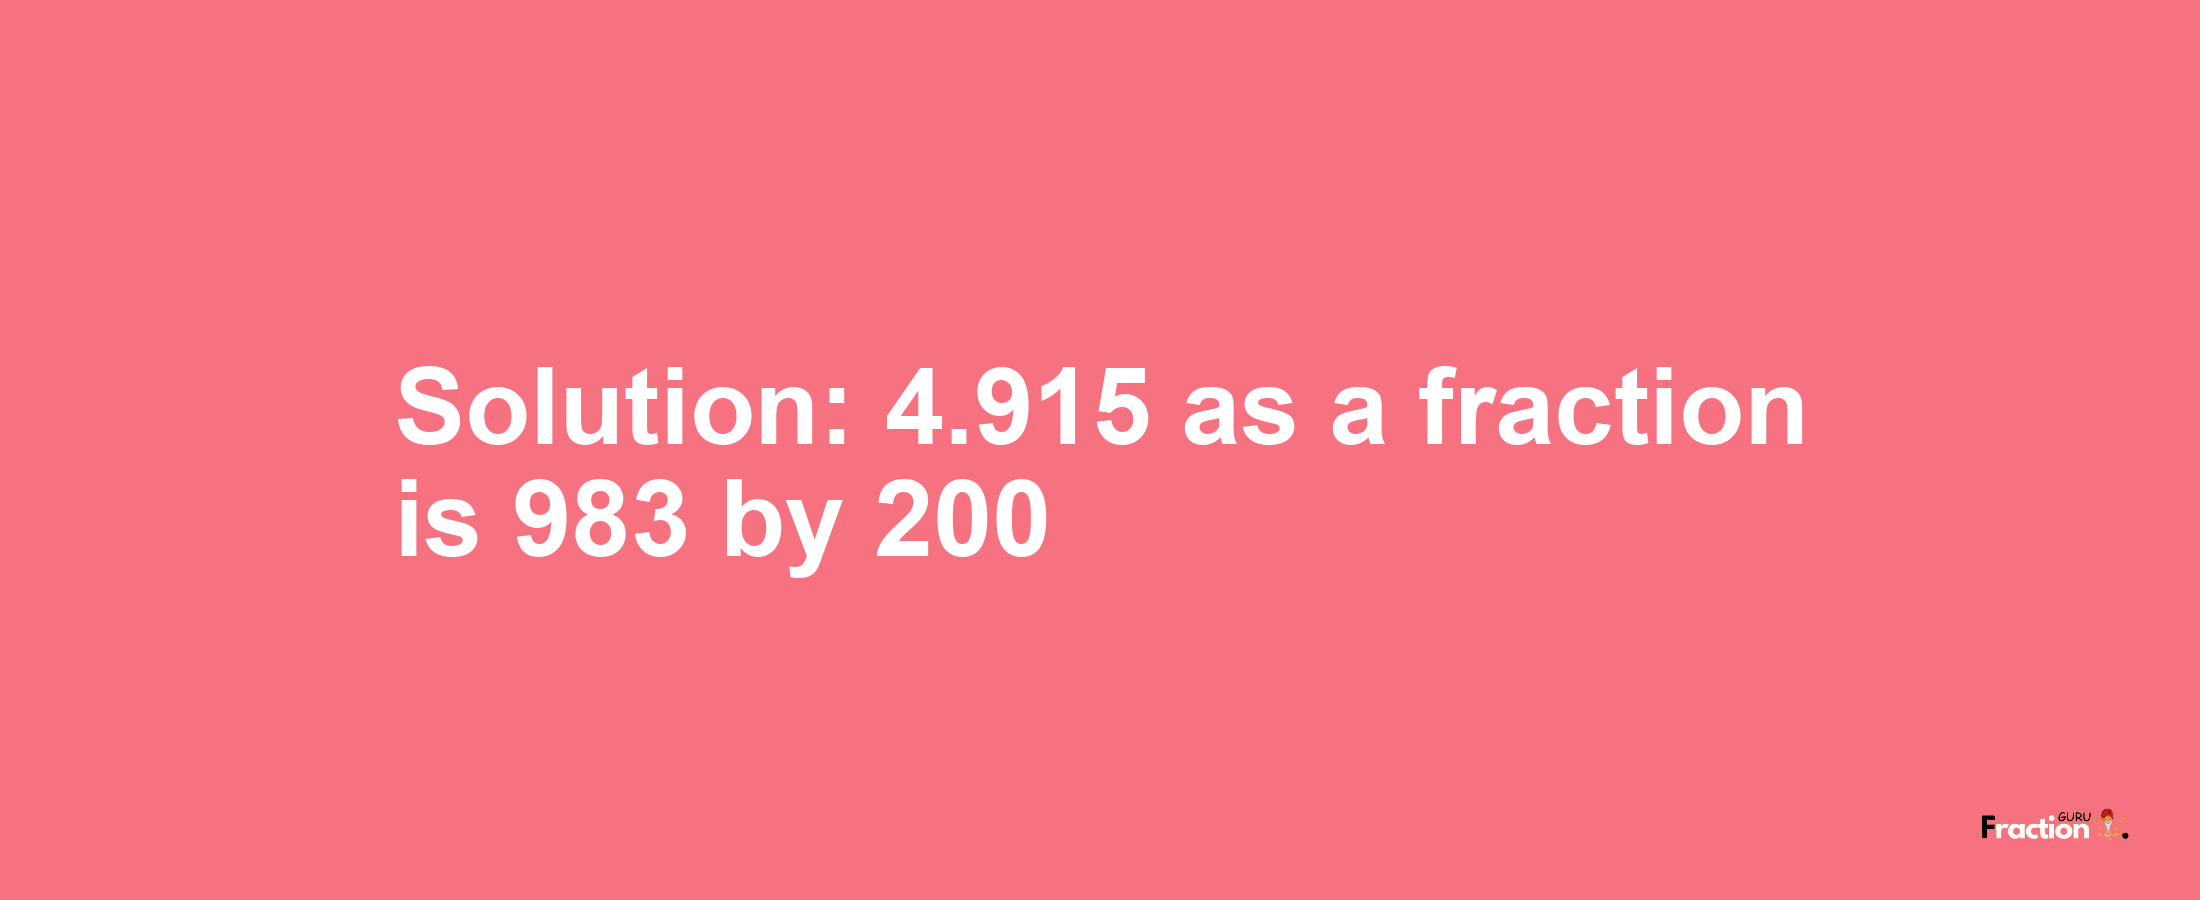 Solution:4.915 as a fraction is 983/200